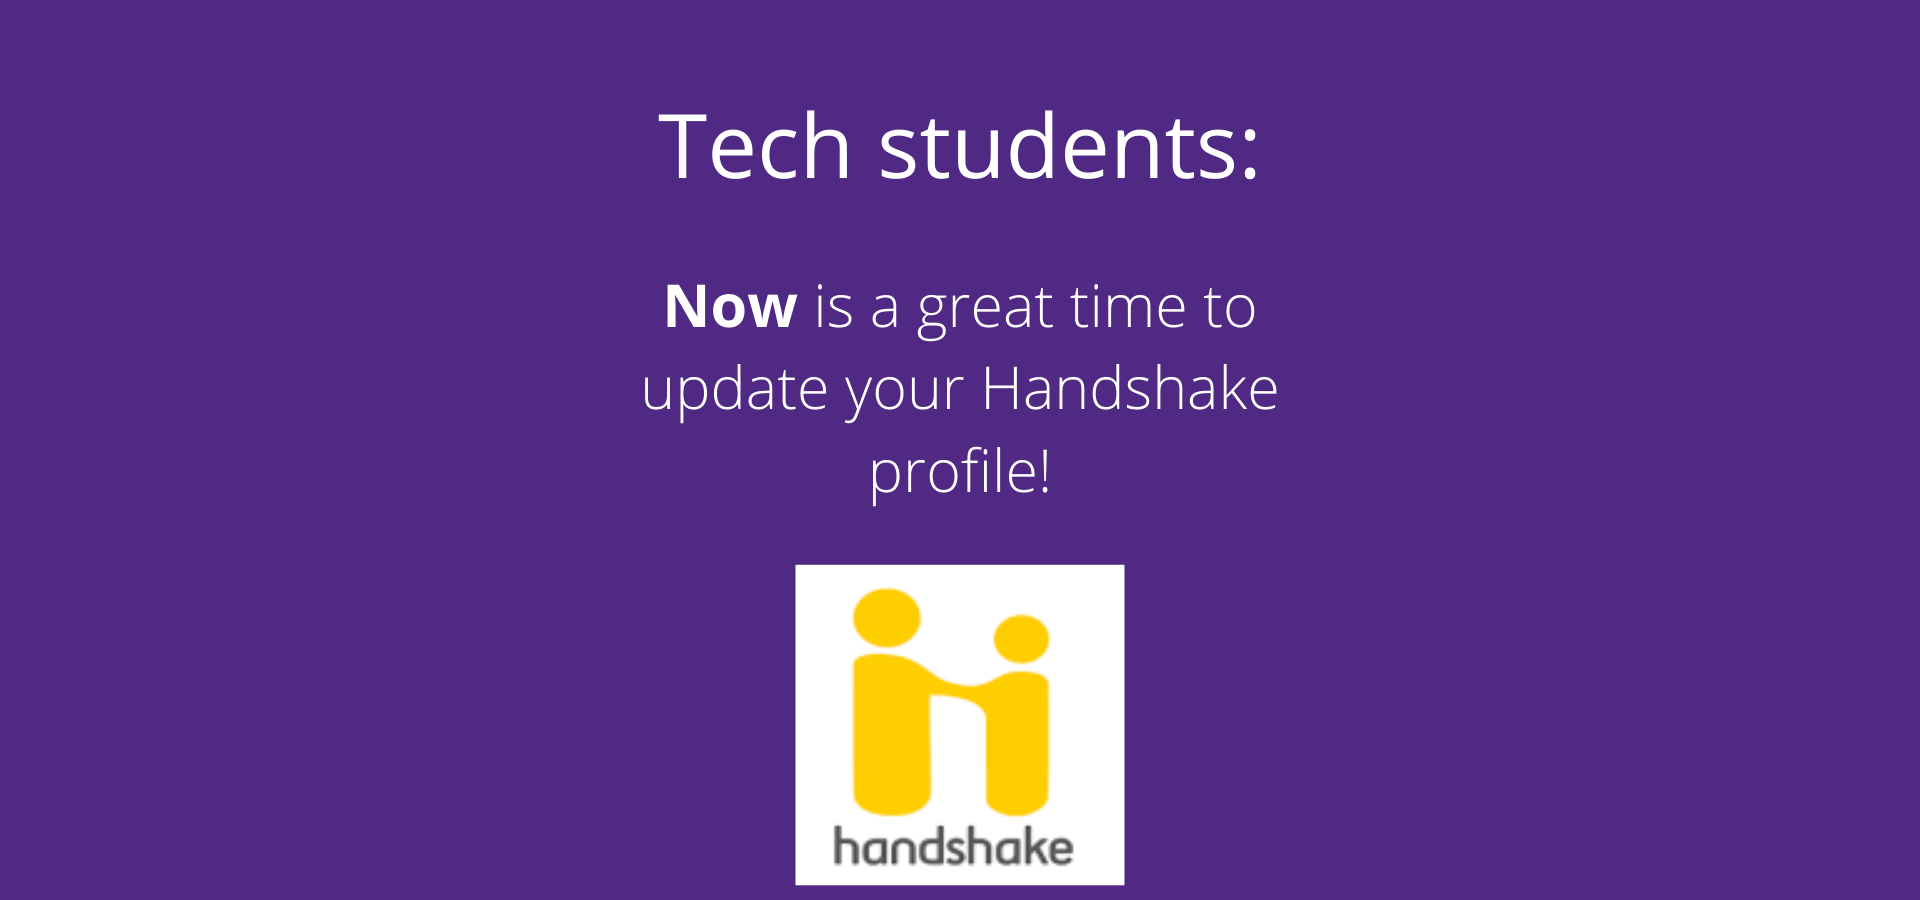 Tech Students - Now is a great time to update your Handshake profile